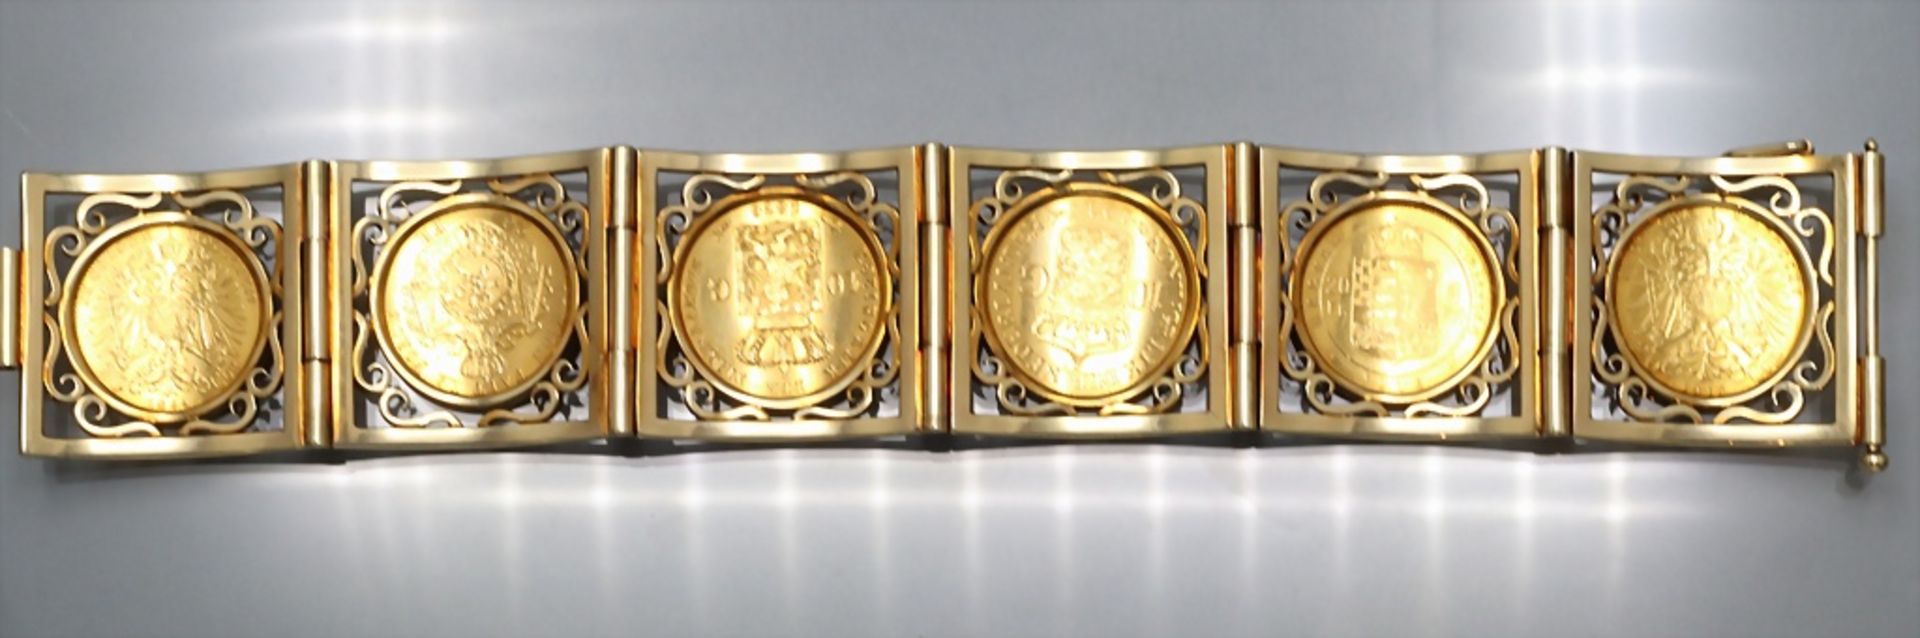 Münzarmband / An 18 ct gold coin bracelet - Image 3 of 7